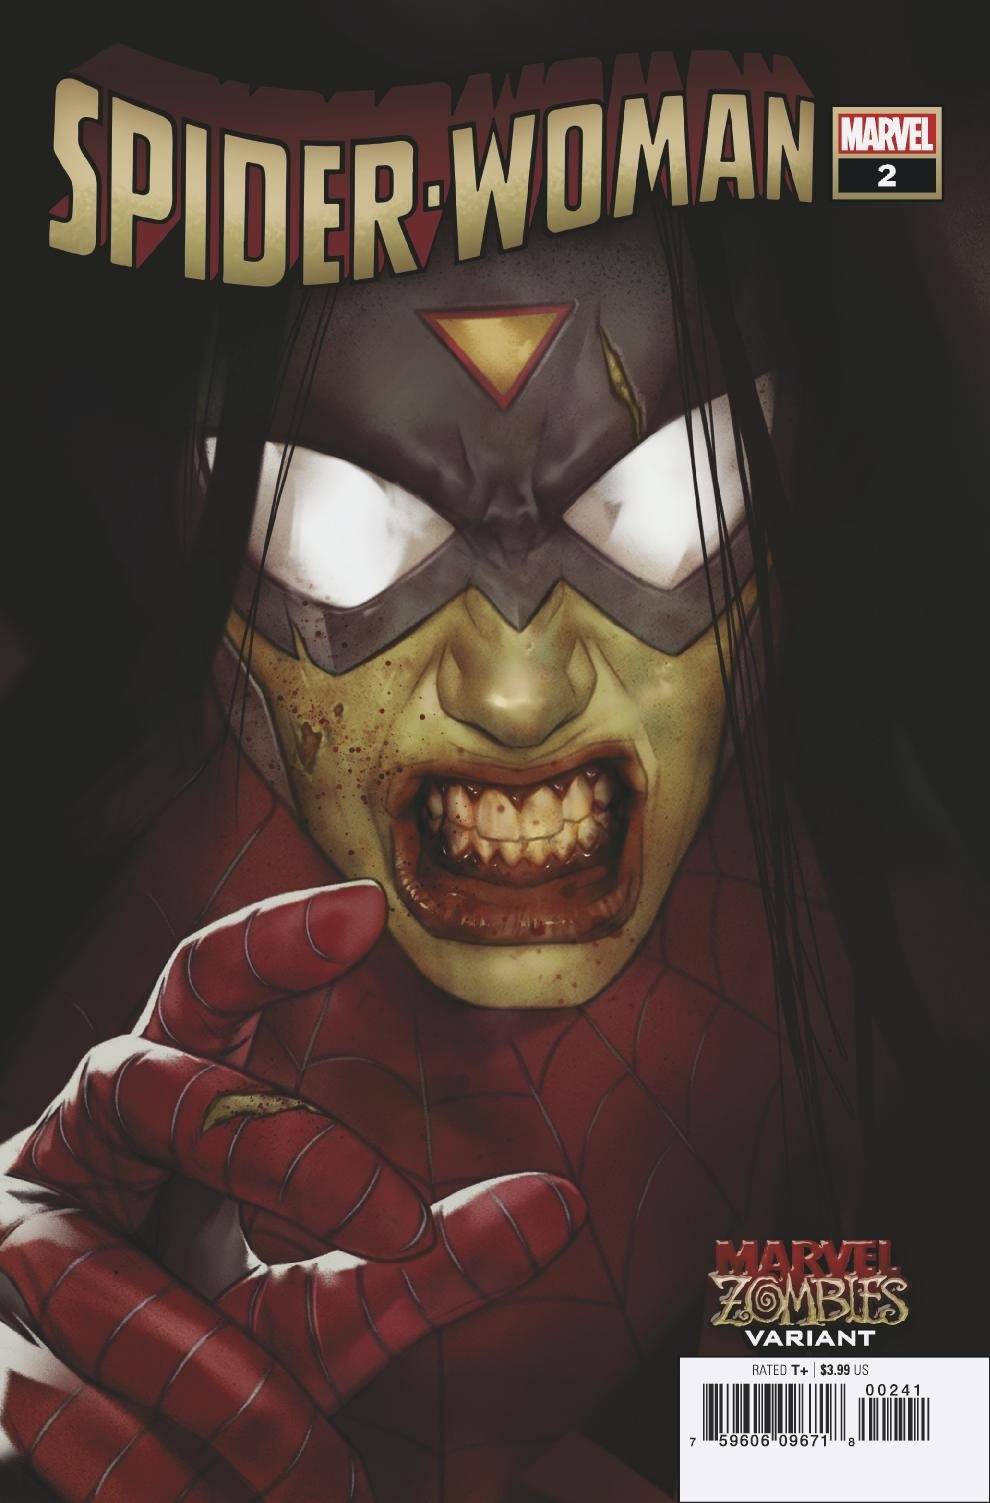 SPIDER-WOMAN #2 OLIVER MARVEL ZOMBIES VARIANT 2020